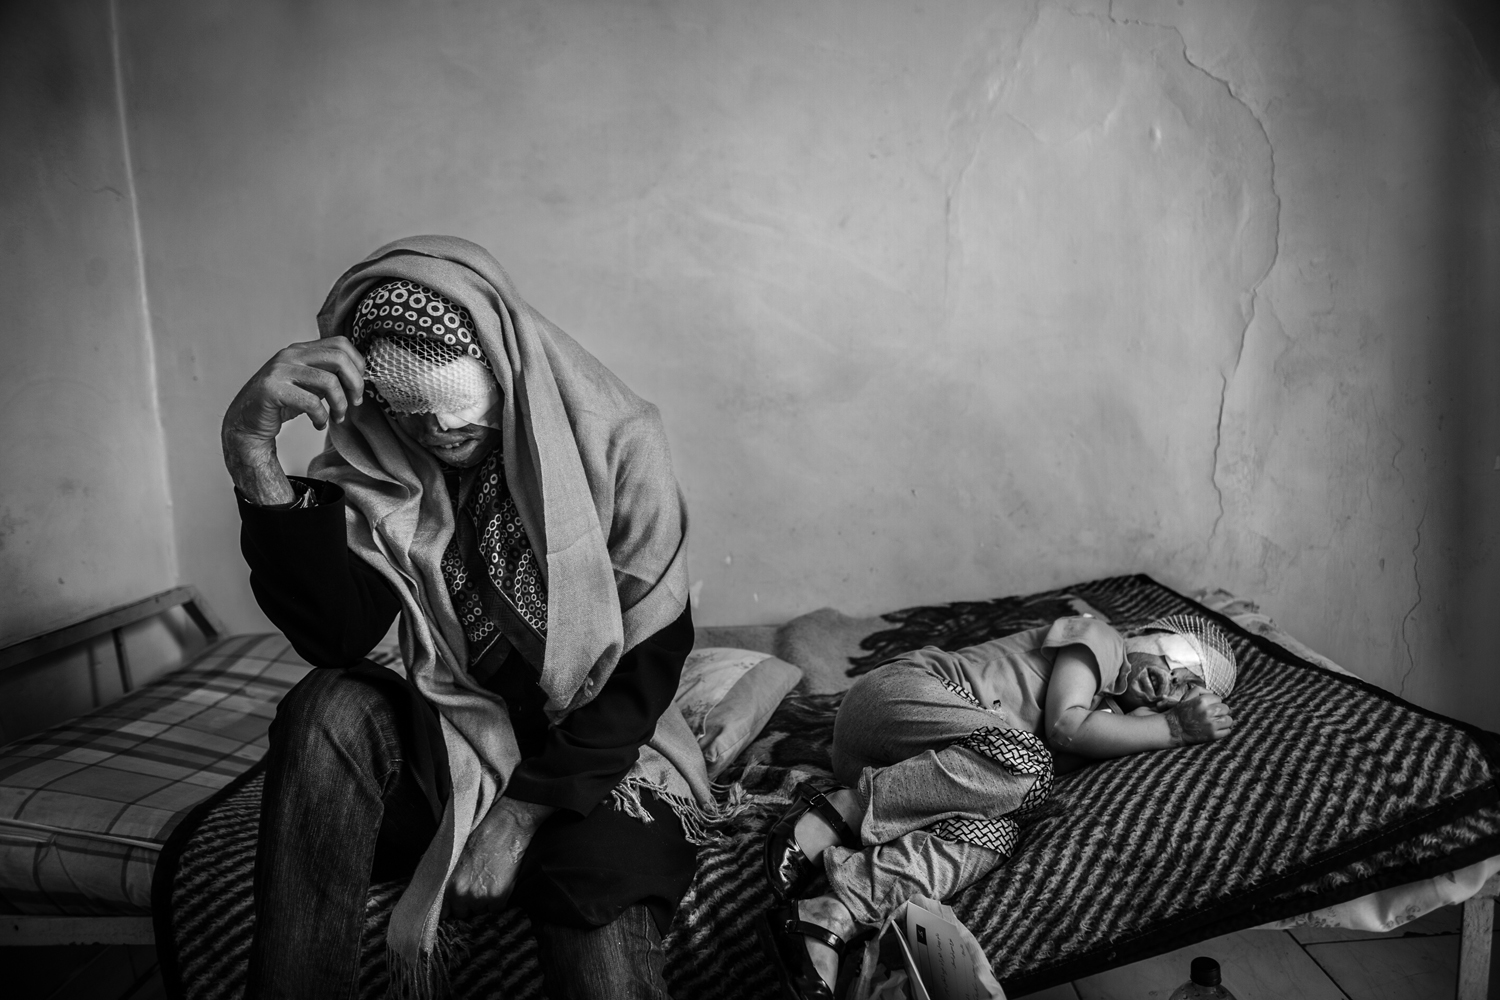 <em>The following photographs were taken between May and December of 2012.</em>Sommayeh and her daughter Rana rest in a hostel in downtown Tehran. The two have shuttled to the Iranian capital for treatment after Sommayeh's husband attacked the family with acid. (Abolfazl Nesaei)